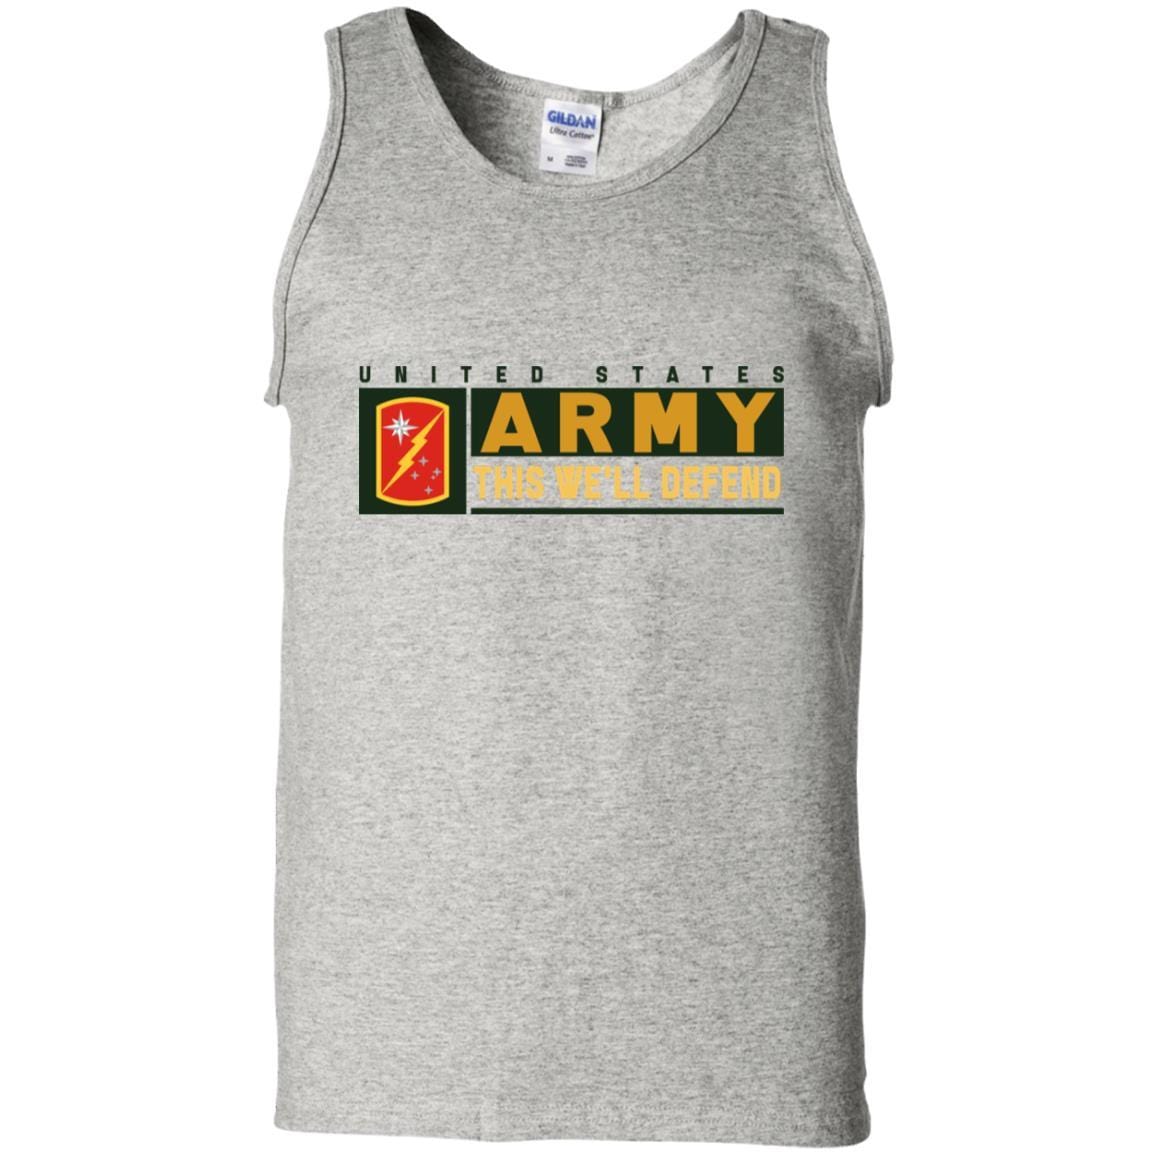 US Army 45TH SUSTAINMENT BRIGADE- This We'll Defend T-Shirt On Front For Men-TShirt-Army-Veterans Nation